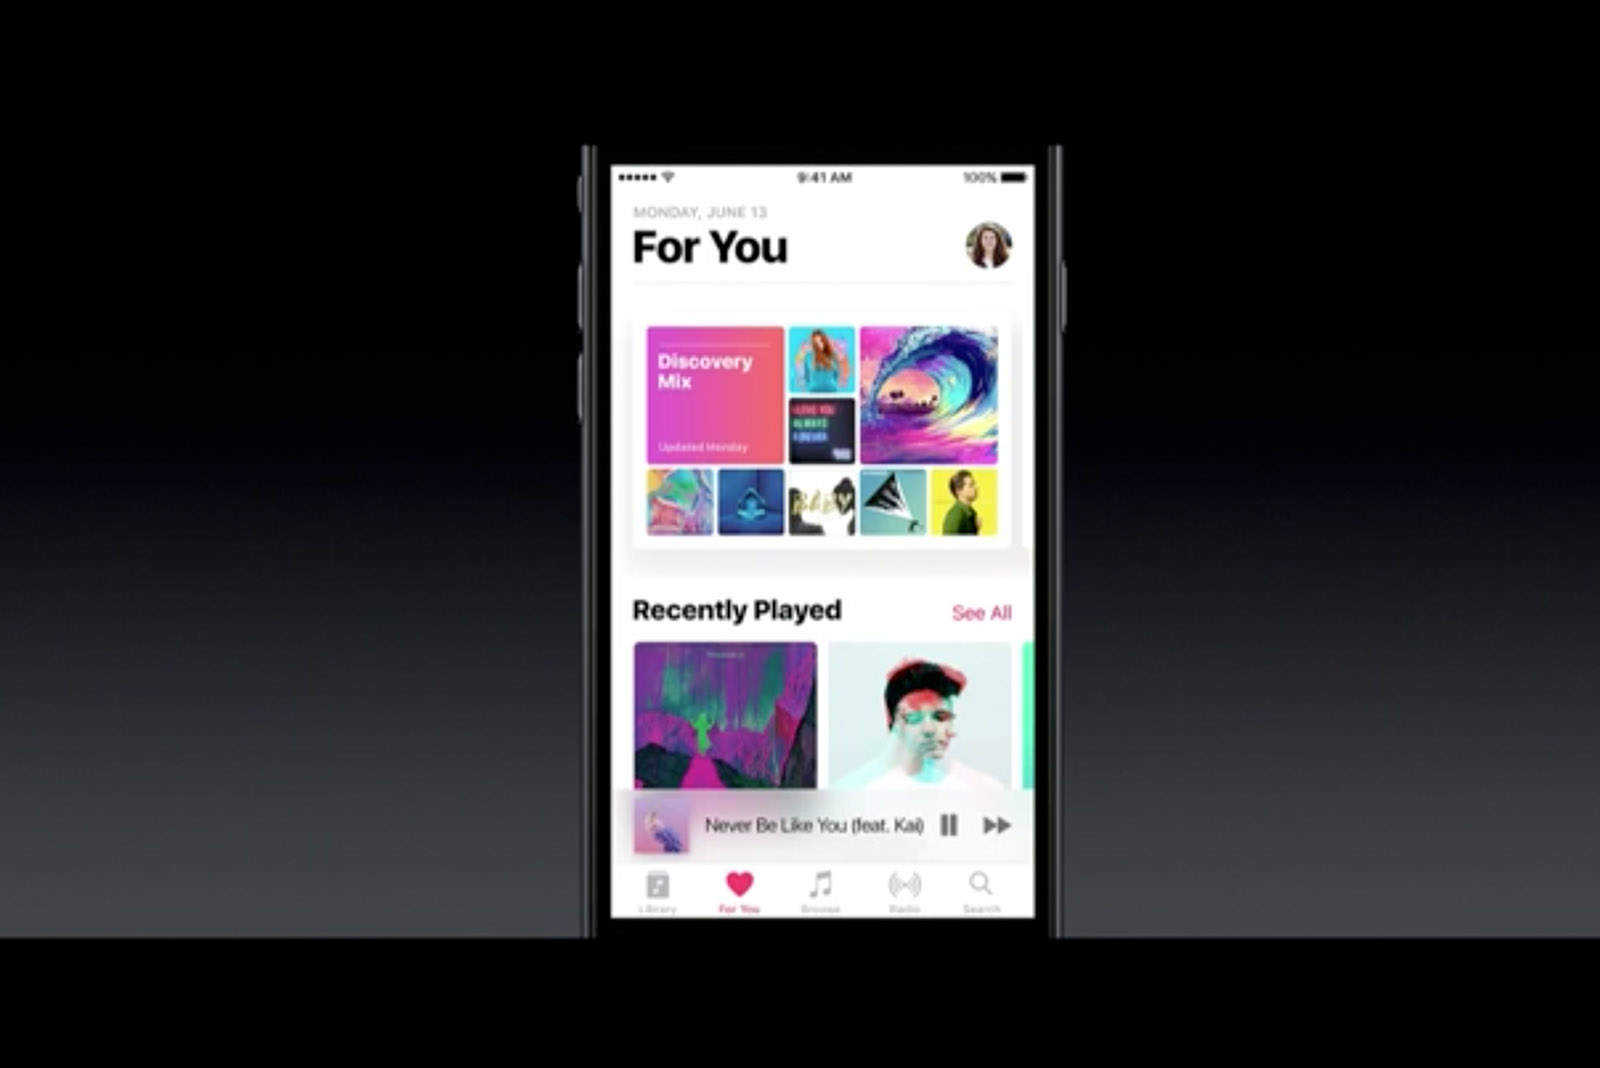 iOS 10 gives Apple Music a makeover.